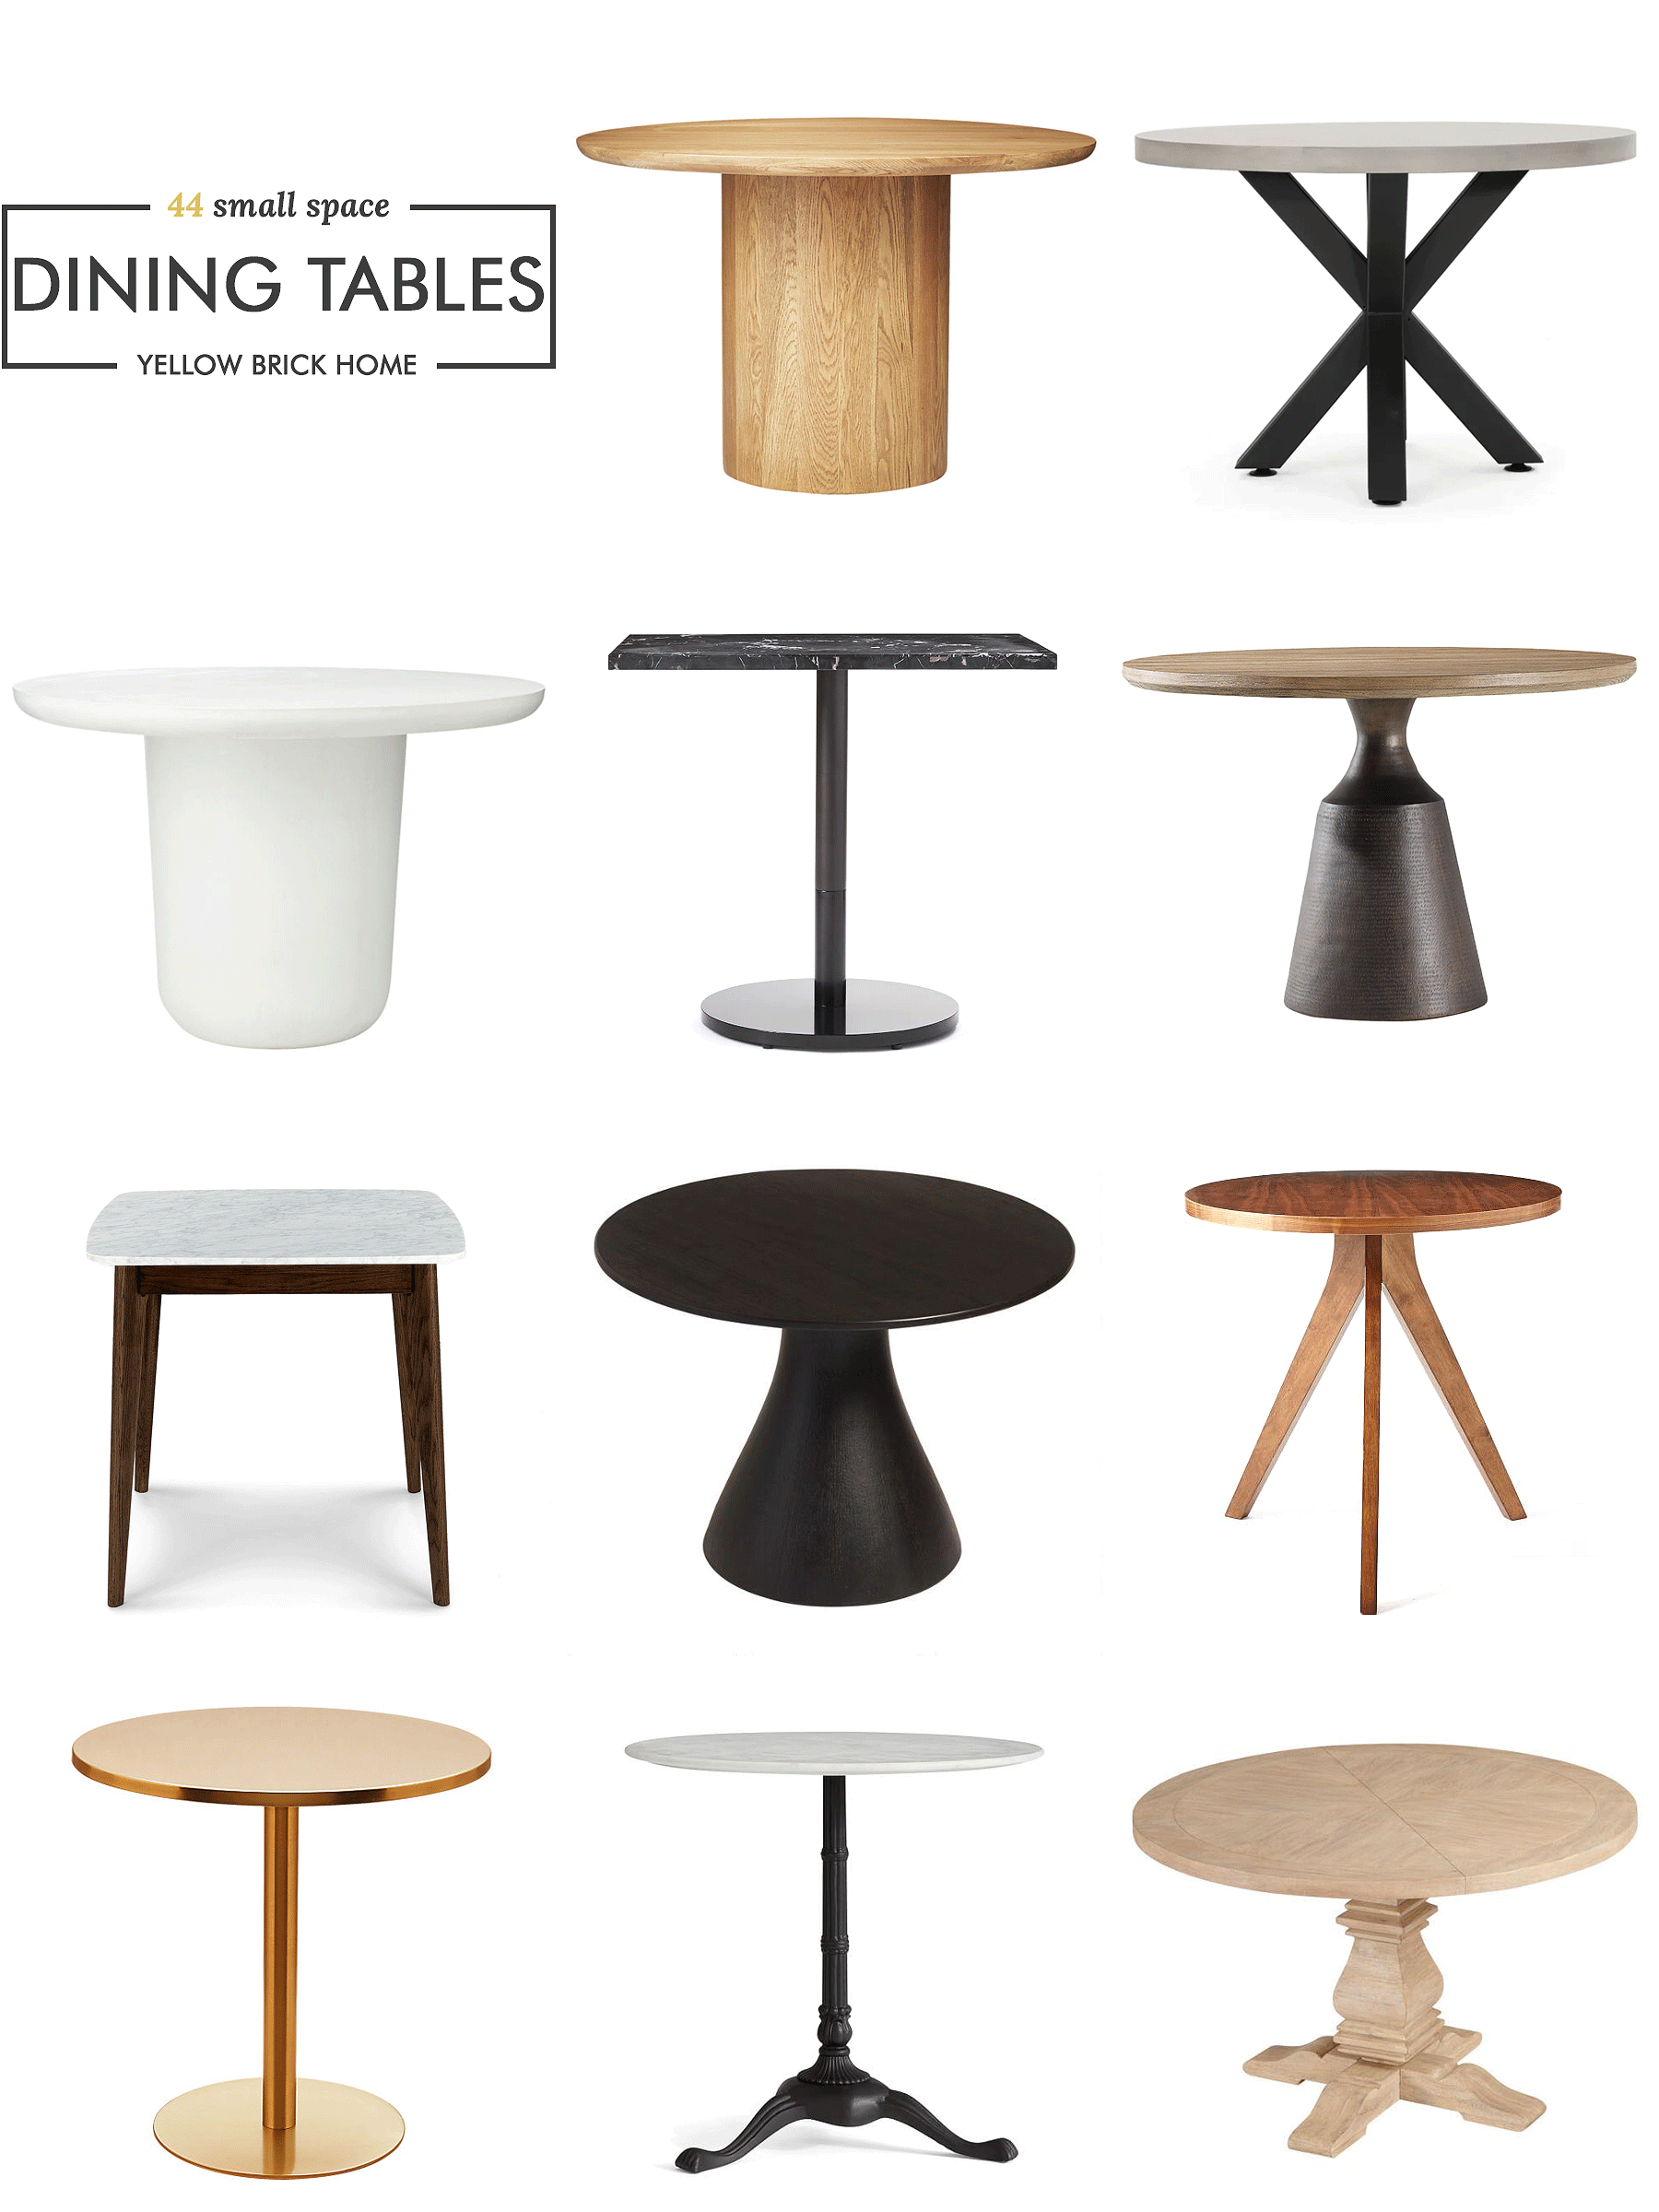 44 Dining Tables For When You Re Short, Round Dining Table Small Space